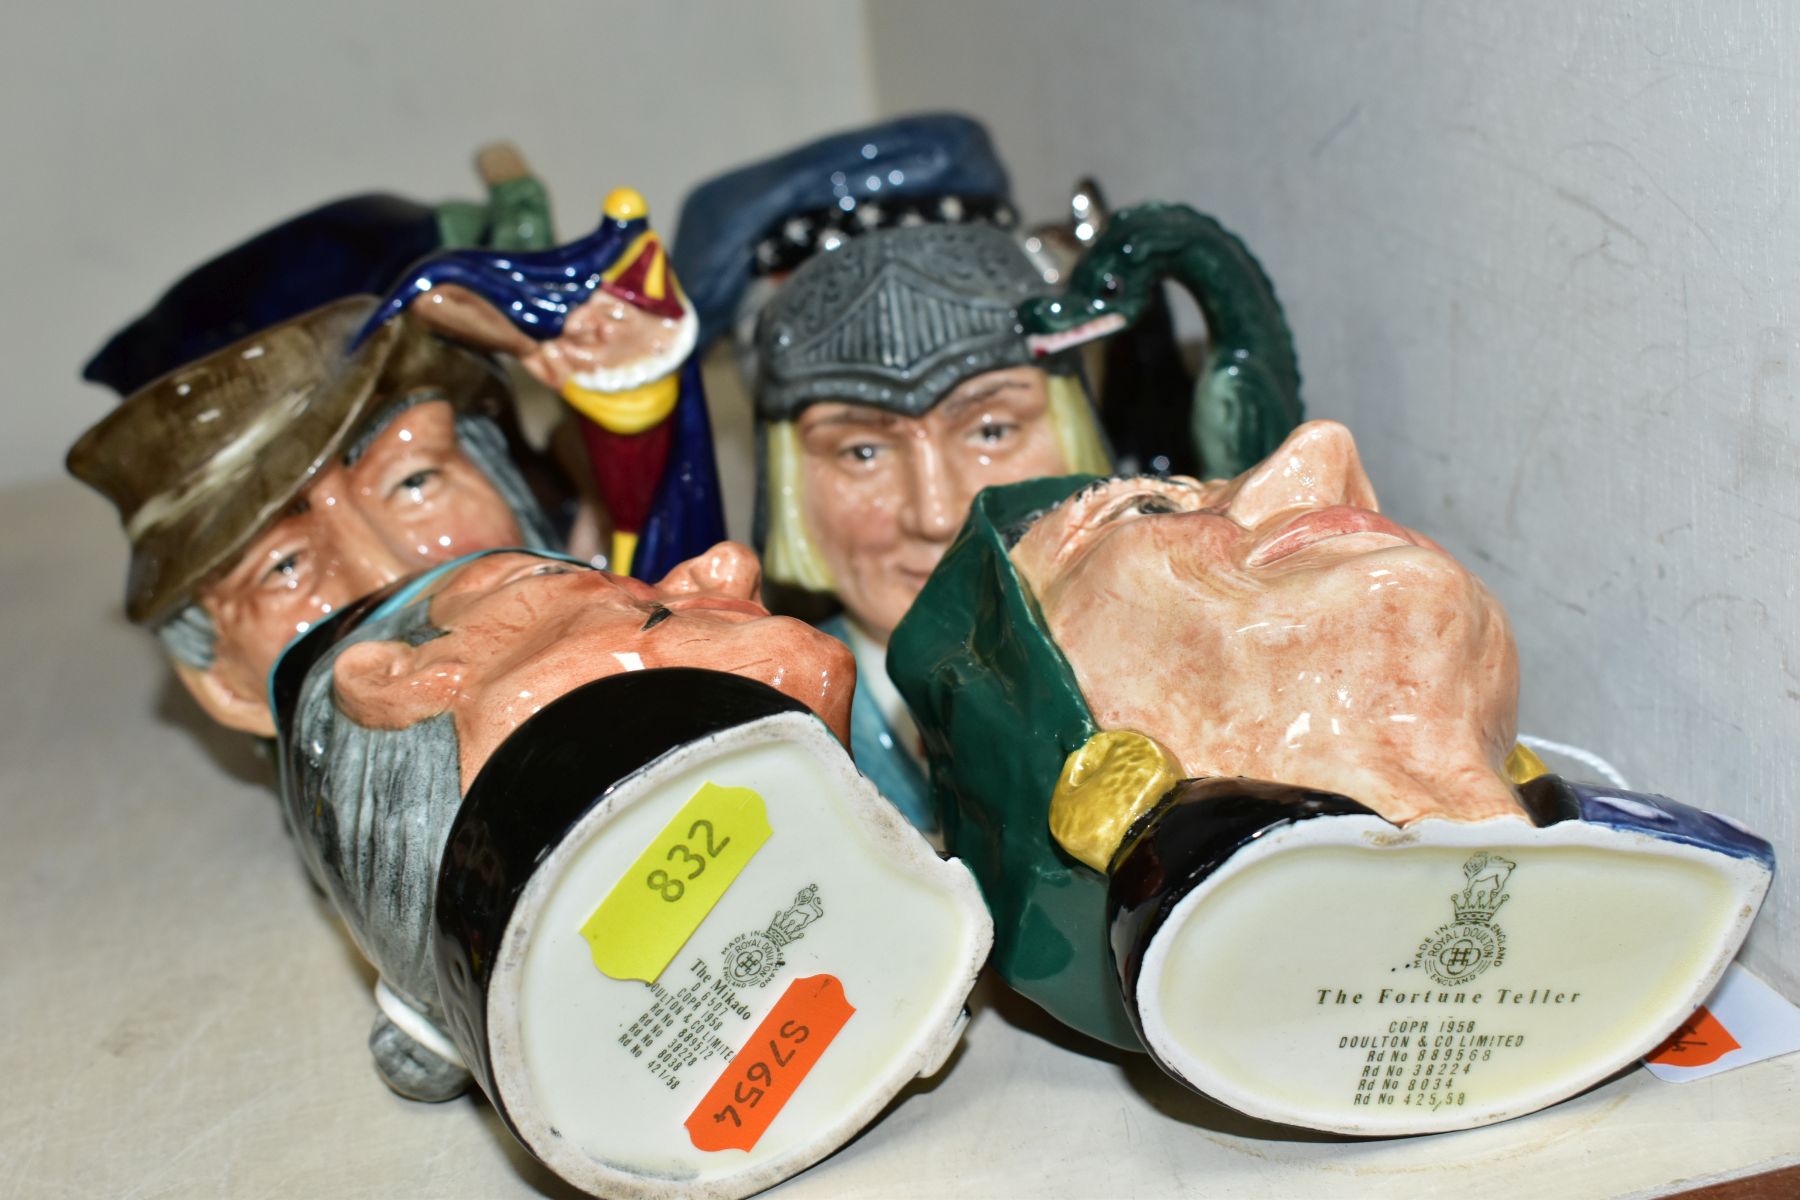 SIX SMALL ROYAL DOULTON CHARACTER JUGS, The Fortune Teller D6503 style one, Mikado D6507, Punch & - Image 5 of 5